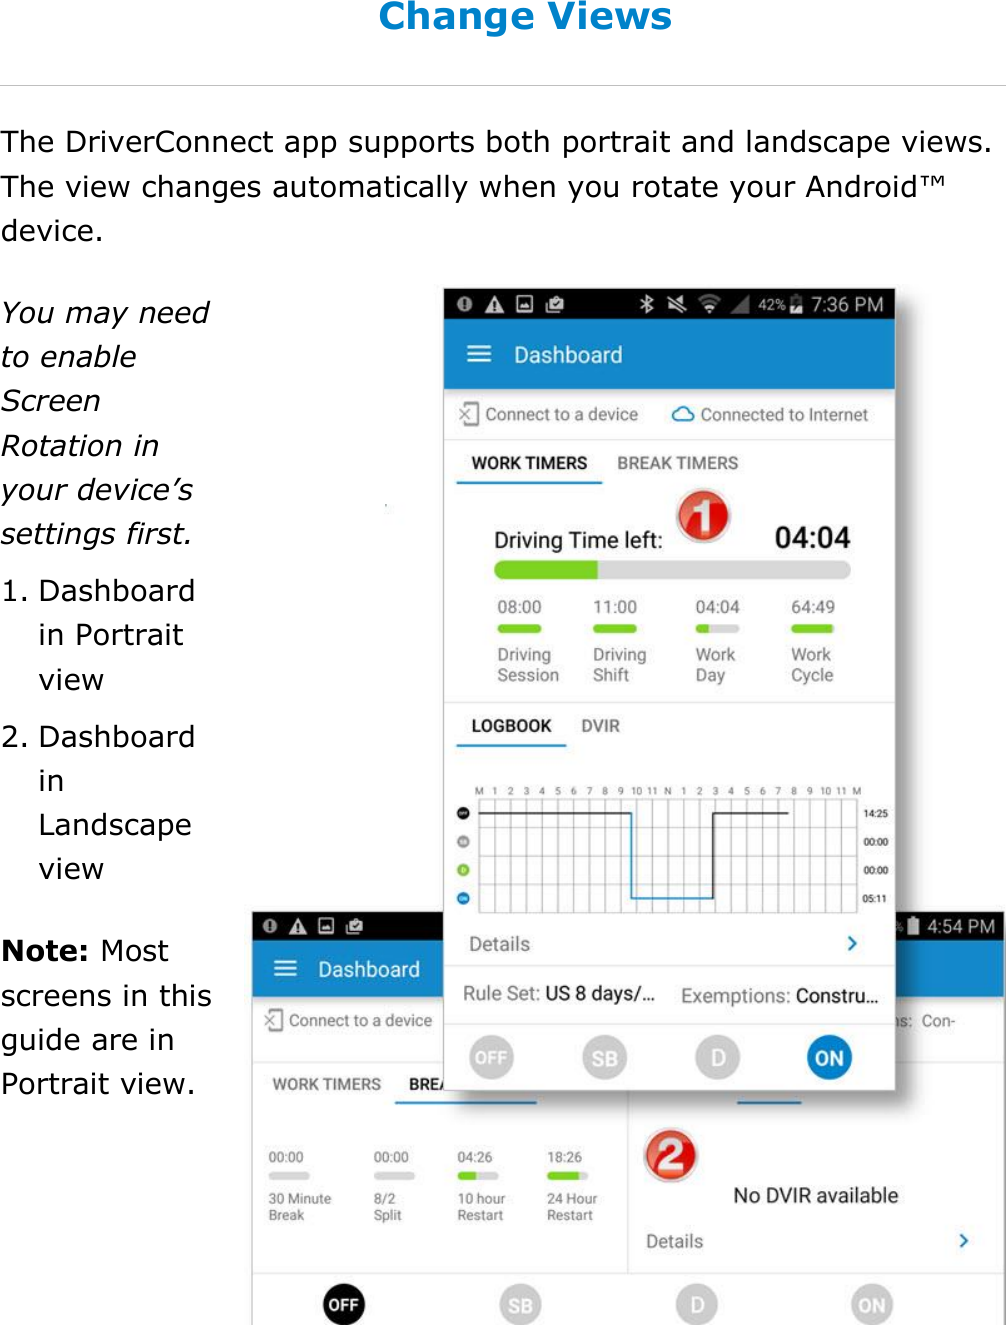 Set My Duty Status DriverConnect User Guide  27 © 2017, Rand McNally, Inc. Change Views The DriverConnect app supports both portrait and landscape views. The view changes automatically when you rotate your Android™ device.  You may need to enable Screen Rotation in your device’s settings first. 1. Dashboard in Portrait view 2. Dashboard in Landscape view Note: Most screens in this guide are in Portrait view.   